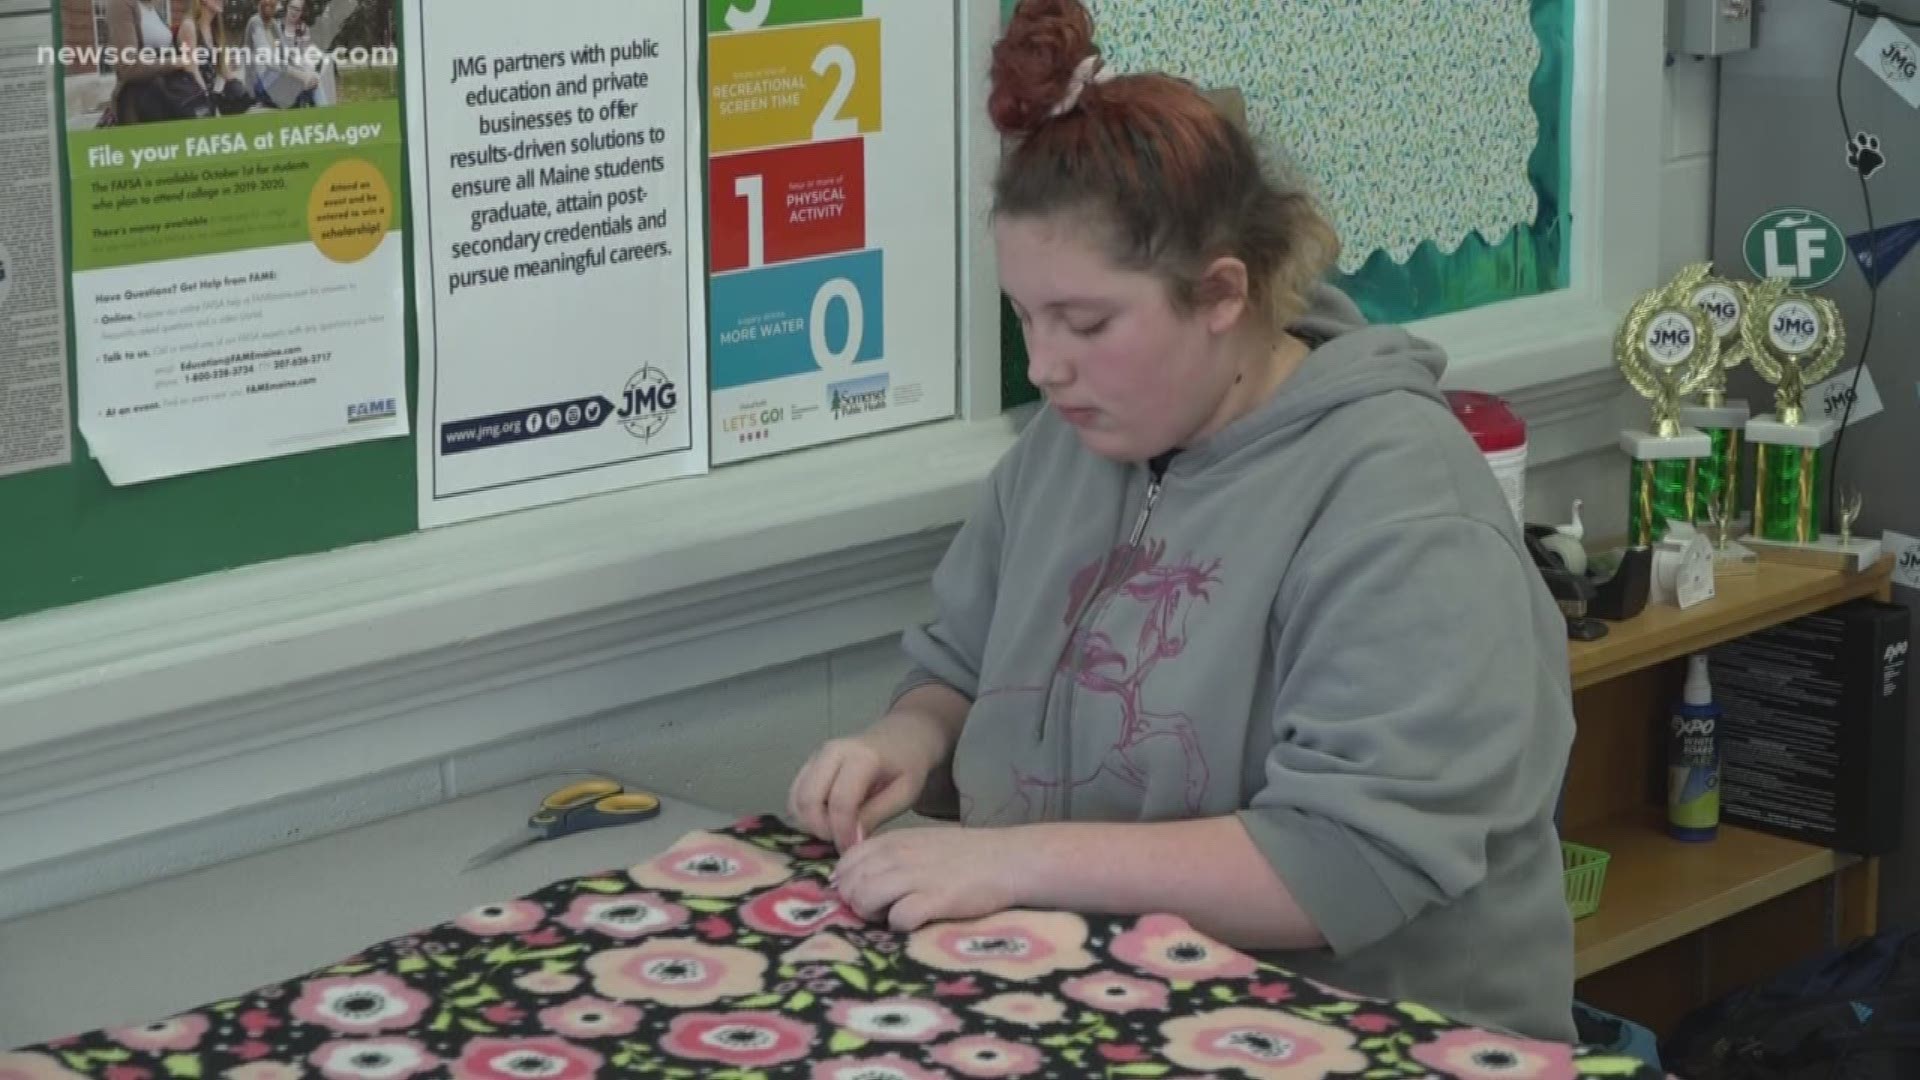 Students at Lawrence high school are giving to those in need as well. 
Those in a special program there are making blankets to donate to people in hospice care.